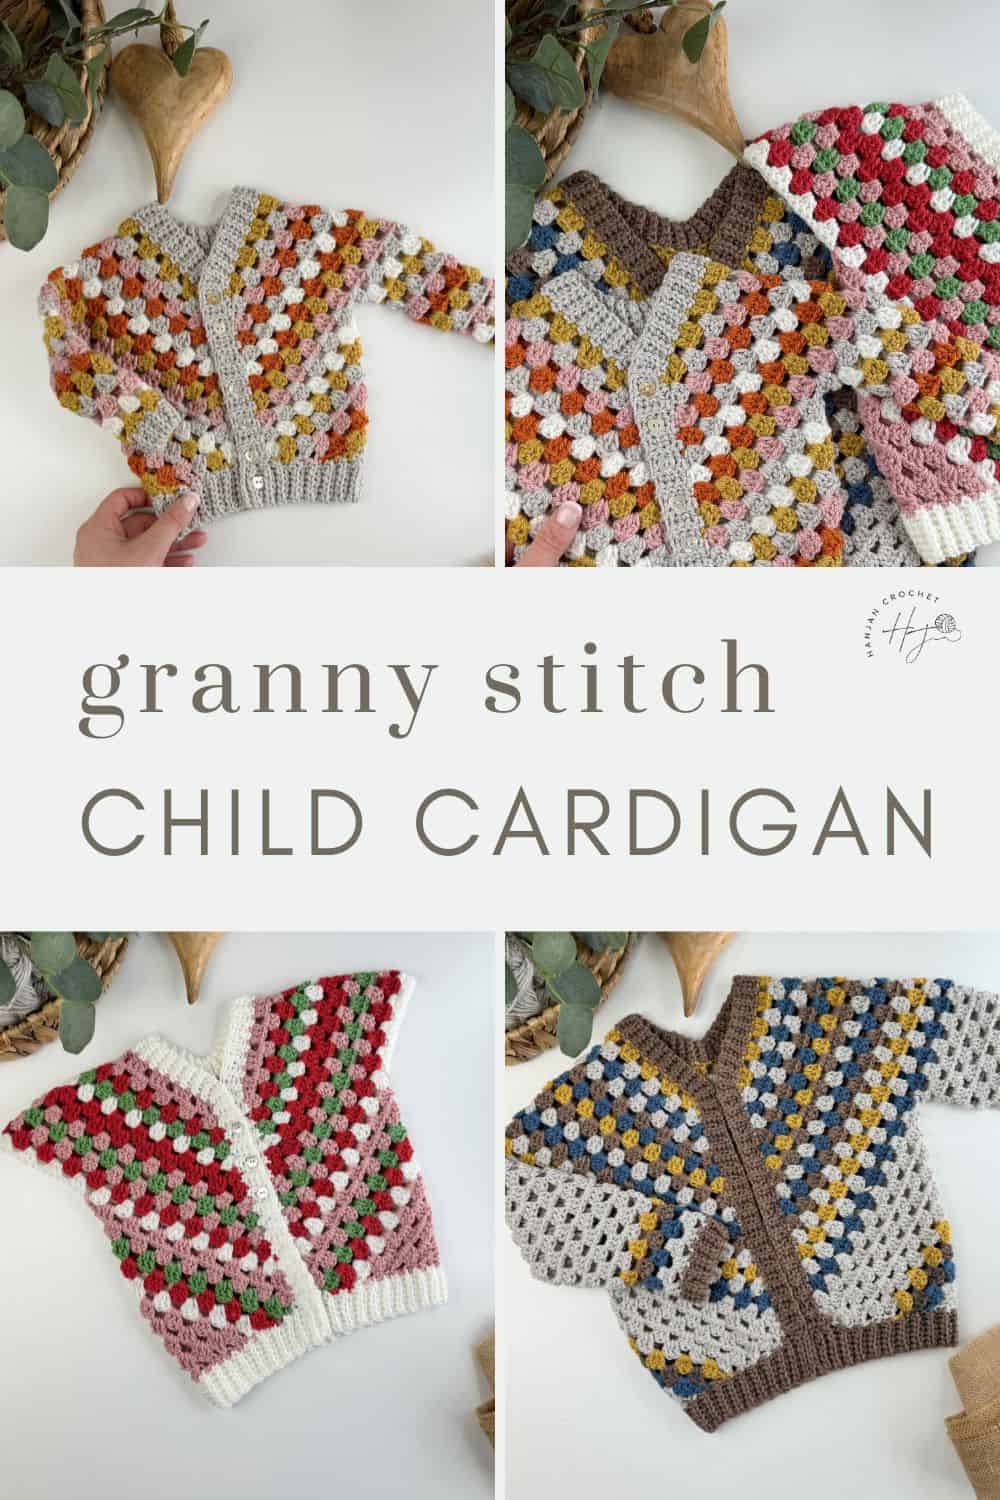 Granny stitch child cardigans in lots of colours.